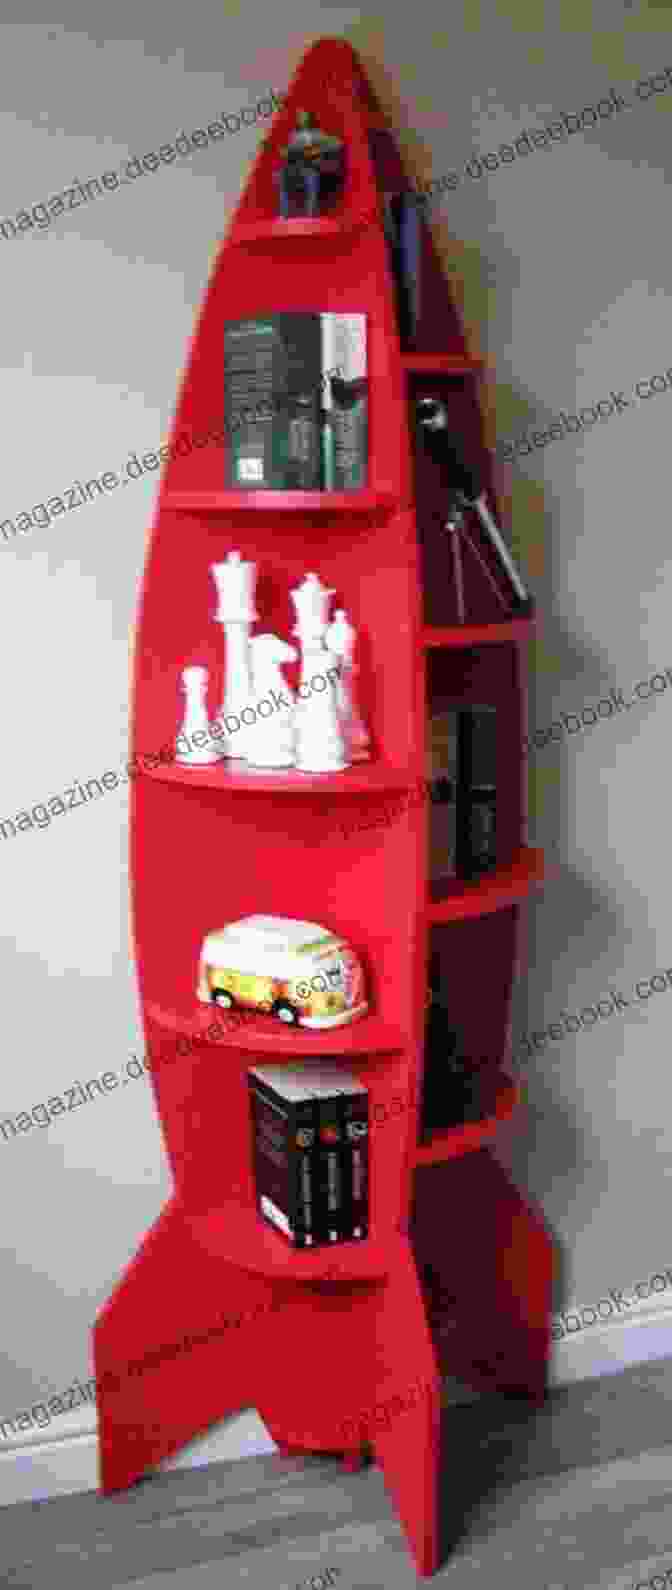 Rocket Bye Rocket Ship Bookcase Shaped Like A Rocket With Shelves And Storage Drawers Rocket Bye (Bedtime Dream Collection 2)